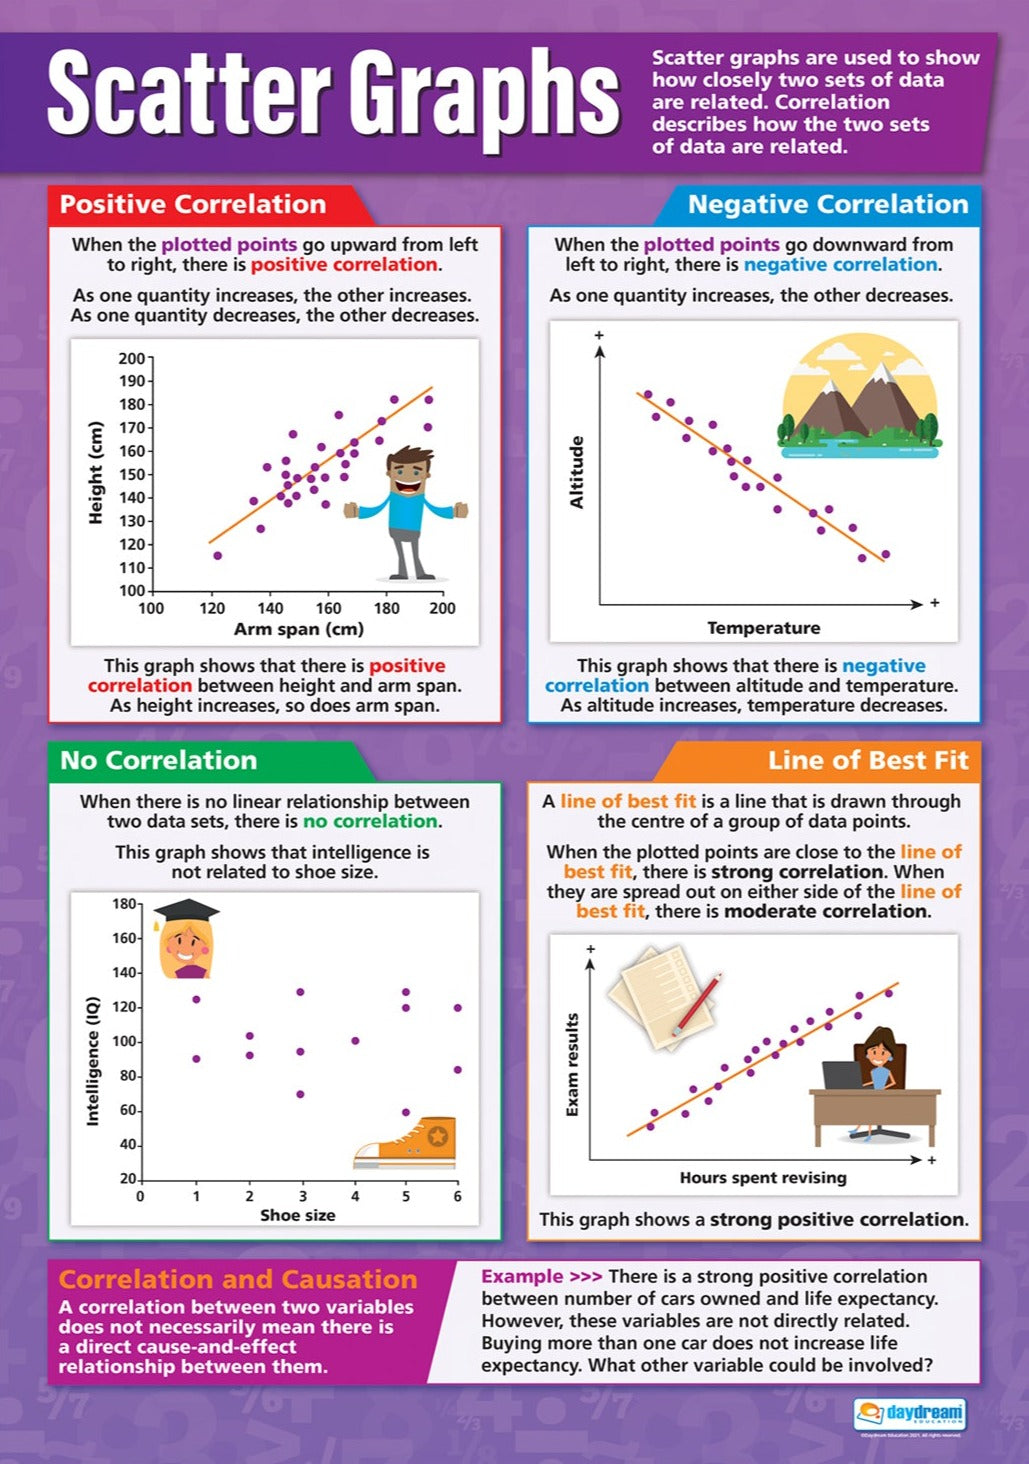 Probability & Data, Maths Posters, Maths Charts for the Classroom, Maths Education Charts, Educational School Posters, Classroom Posters, Perfect for Maths Teachers, Maths Classroom